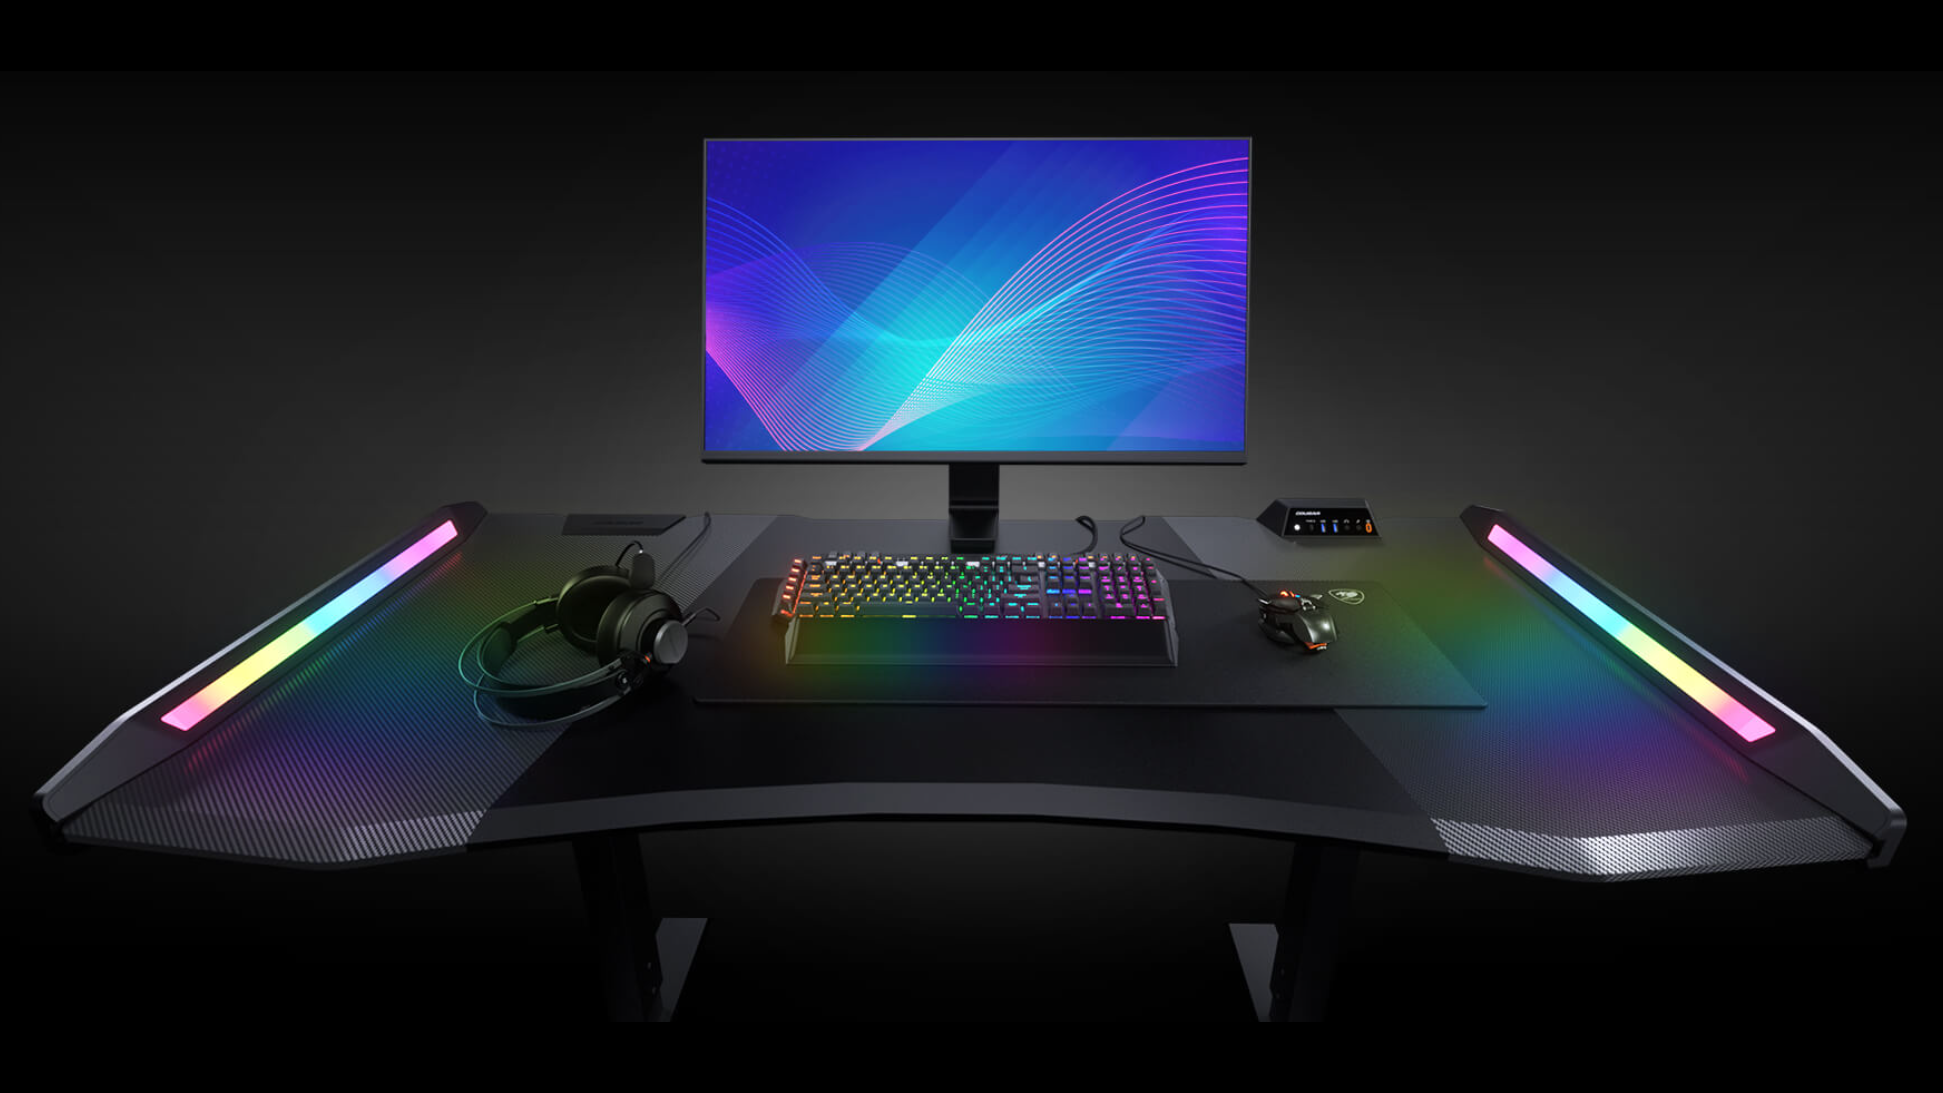 cougar-releases-a-new-gaming-desk-with-usb-c-ports-and-argb